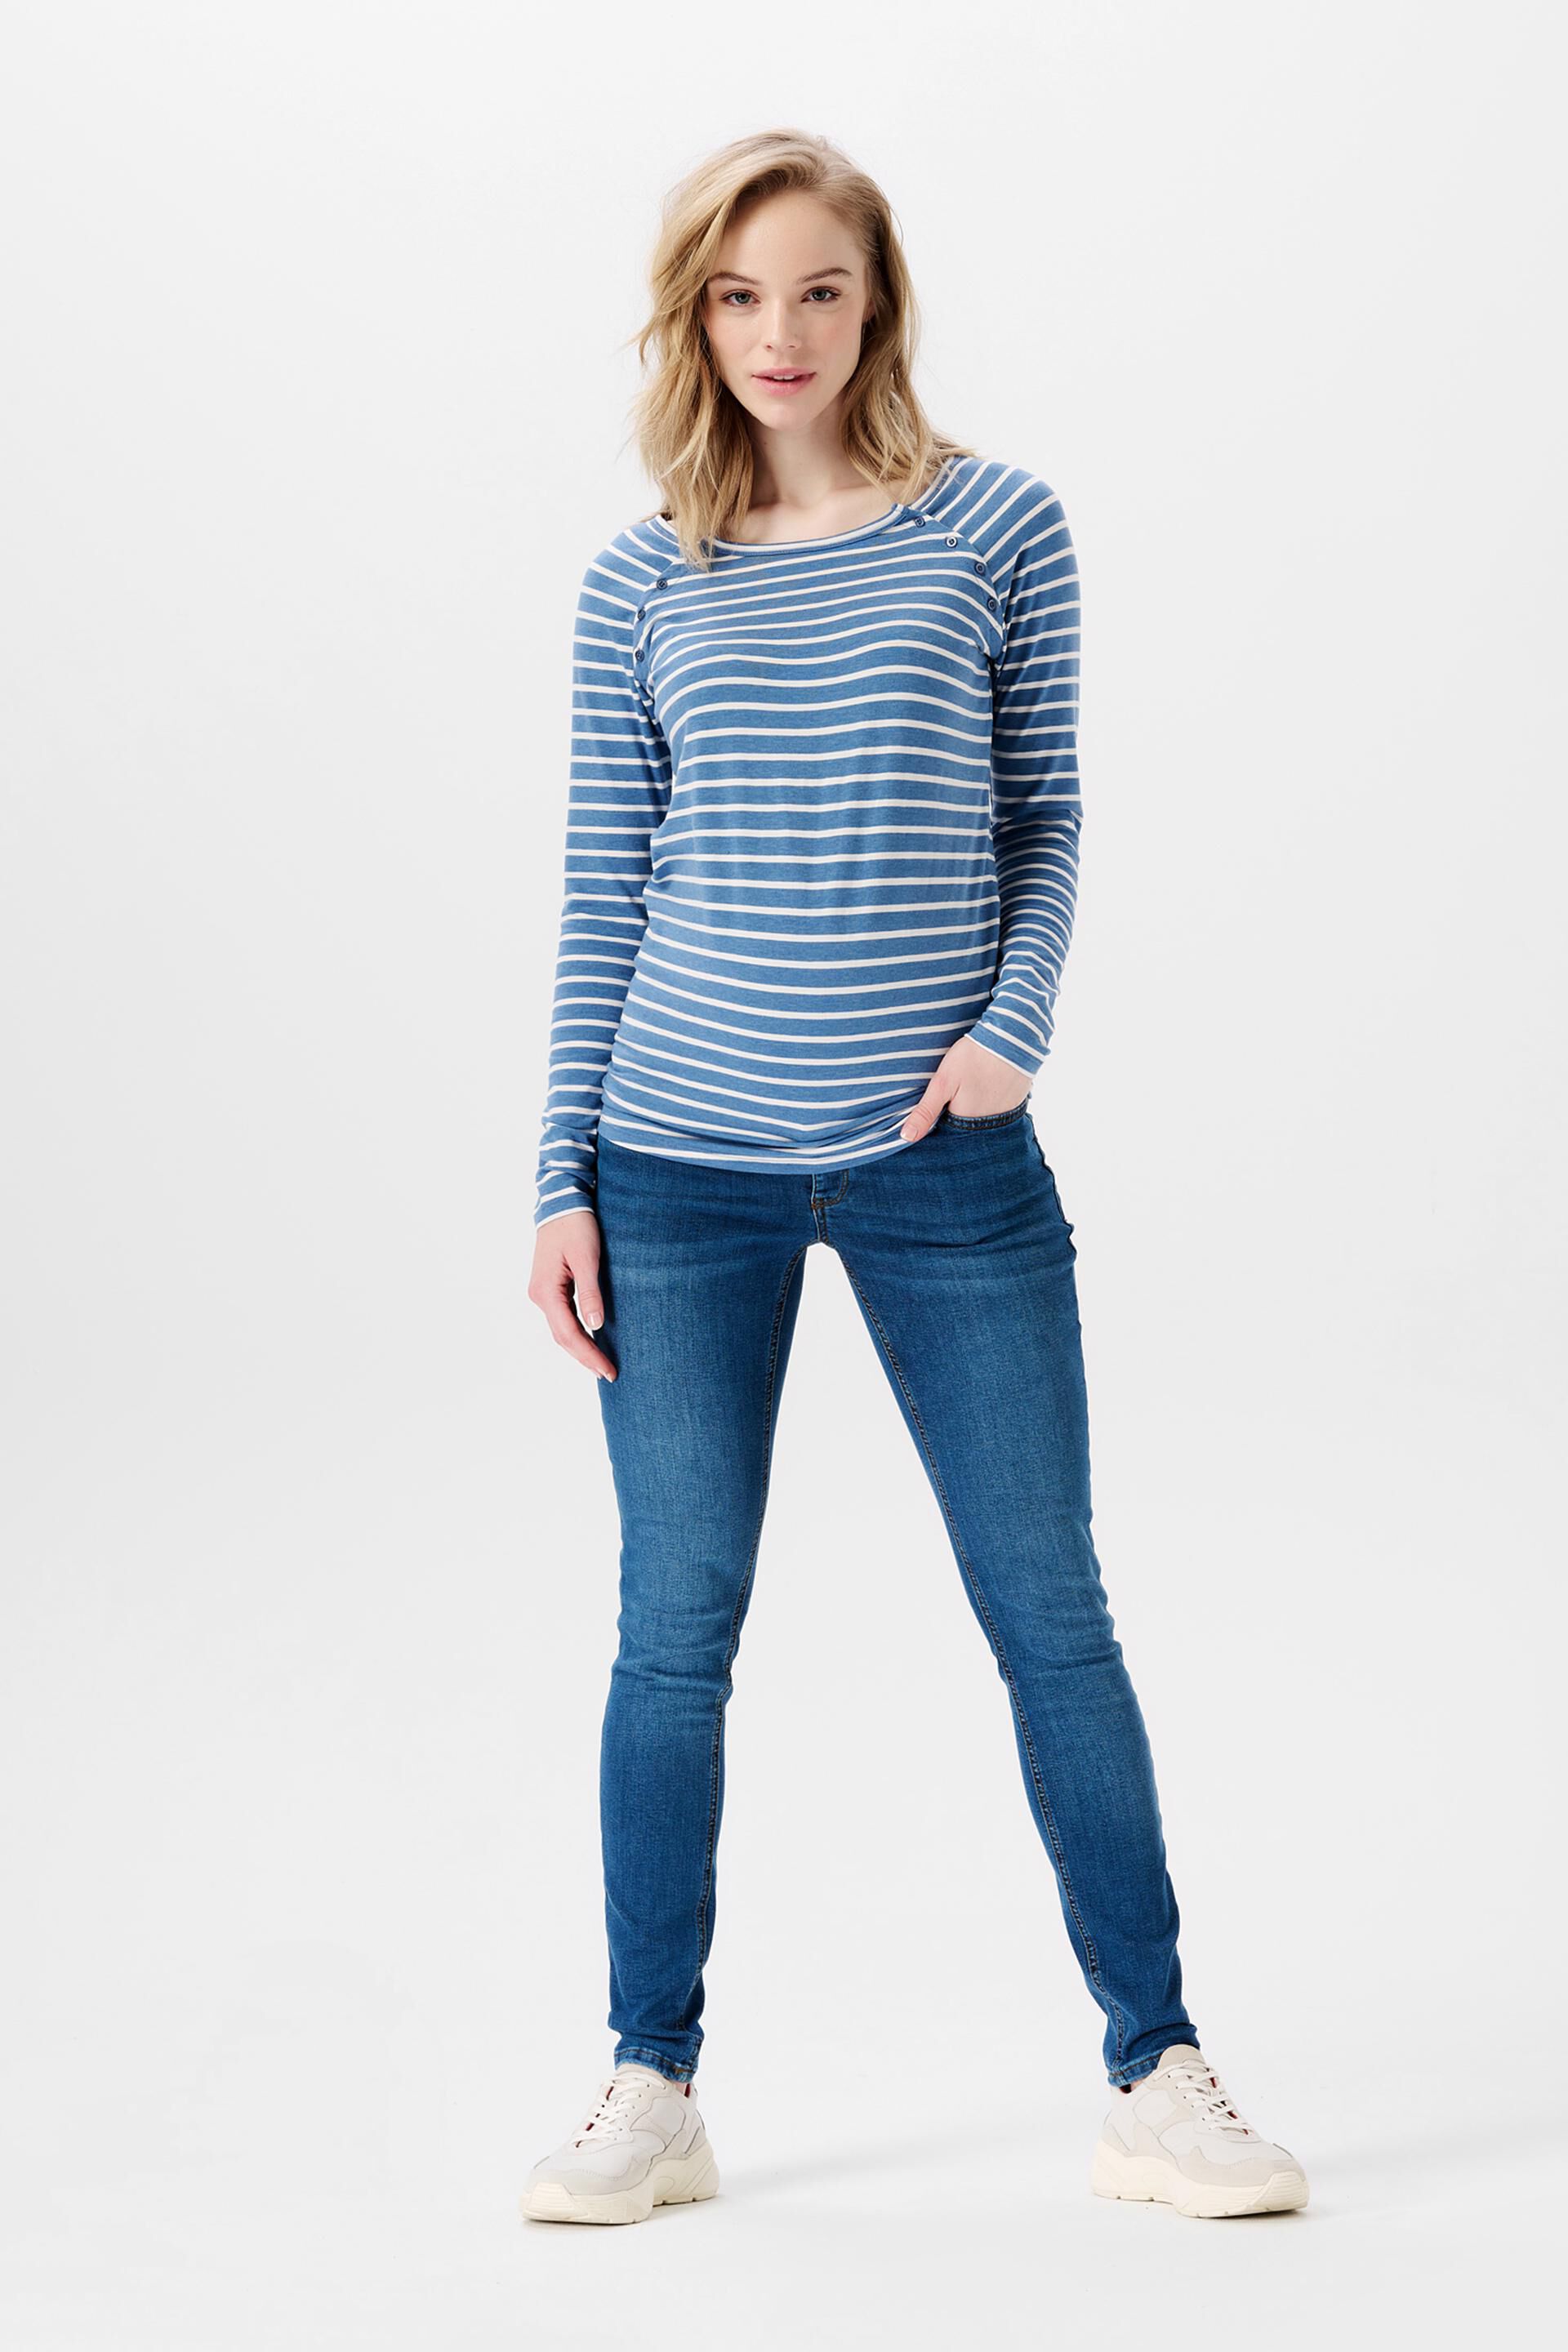 Esprit fit with jeans waistband Skinny over-the-bump